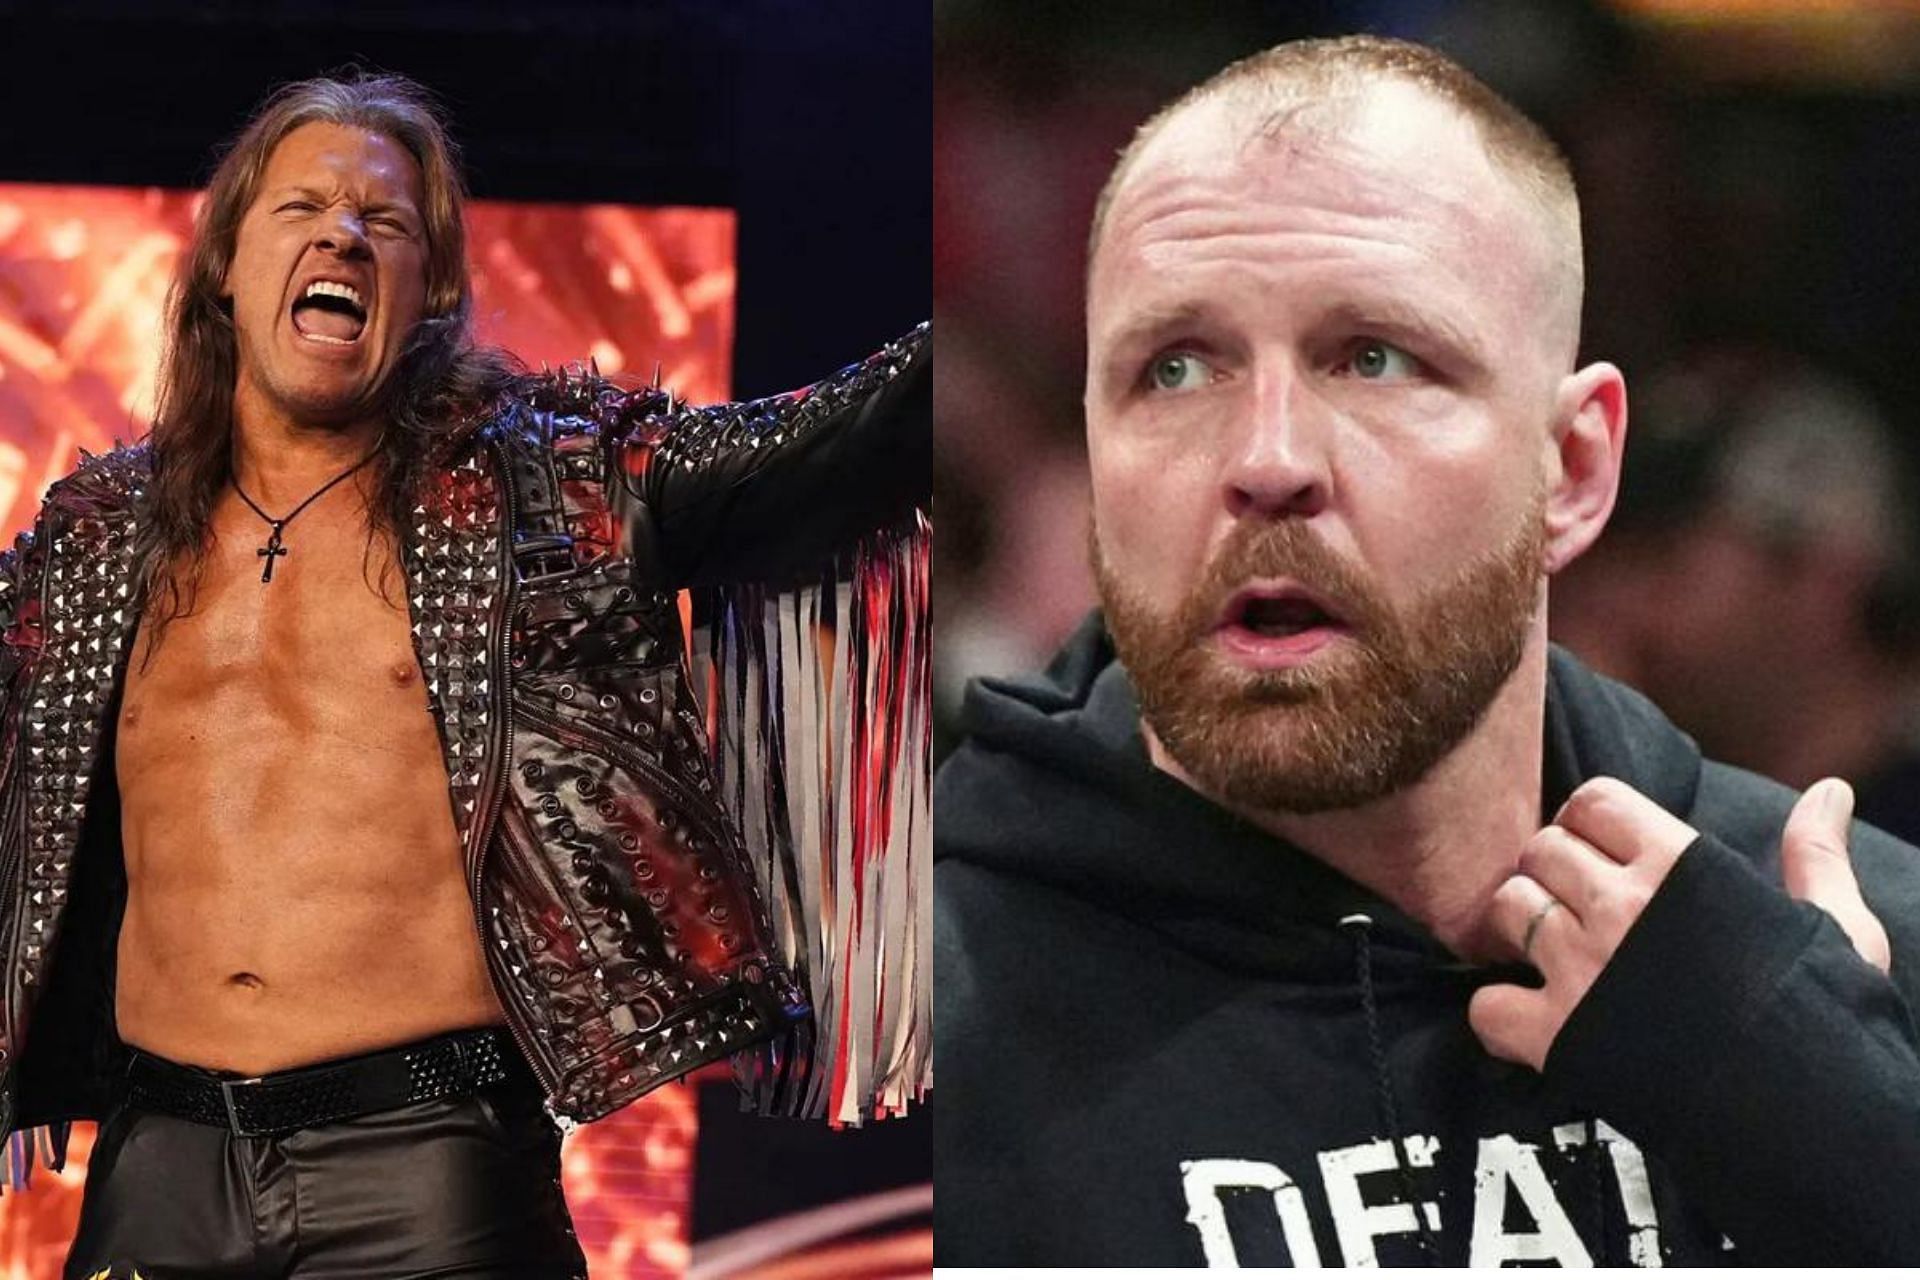 Rumors about AEW wrestlers jumping ship are emerging - only to be squashed